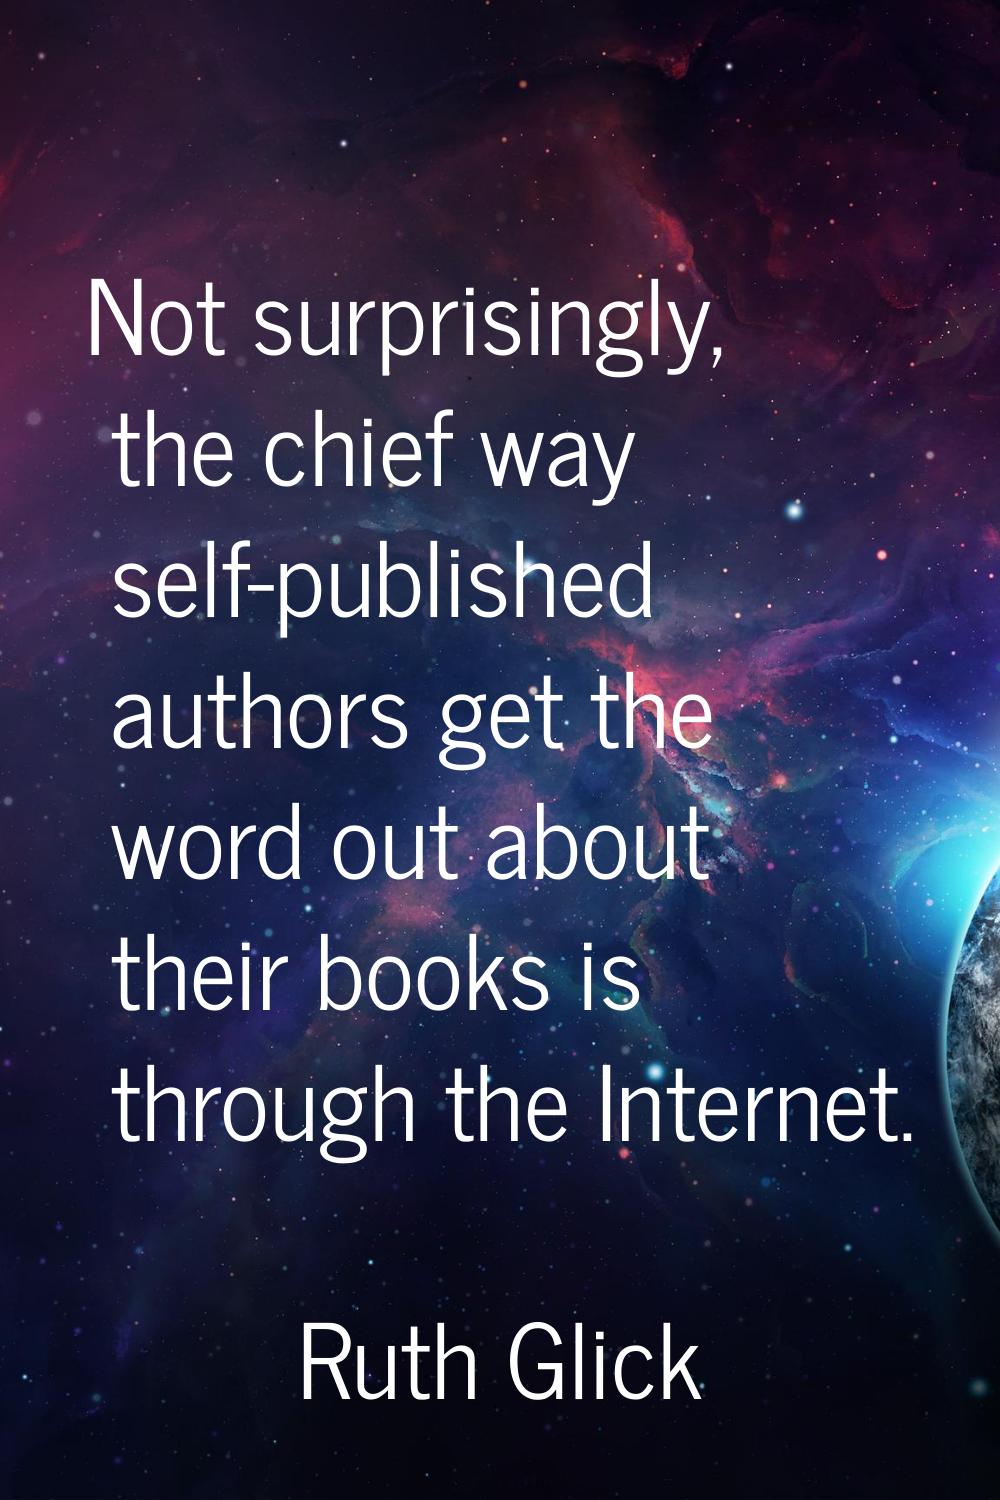 Not surprisingly, the chief way self-published authors get the word out about their books is throug